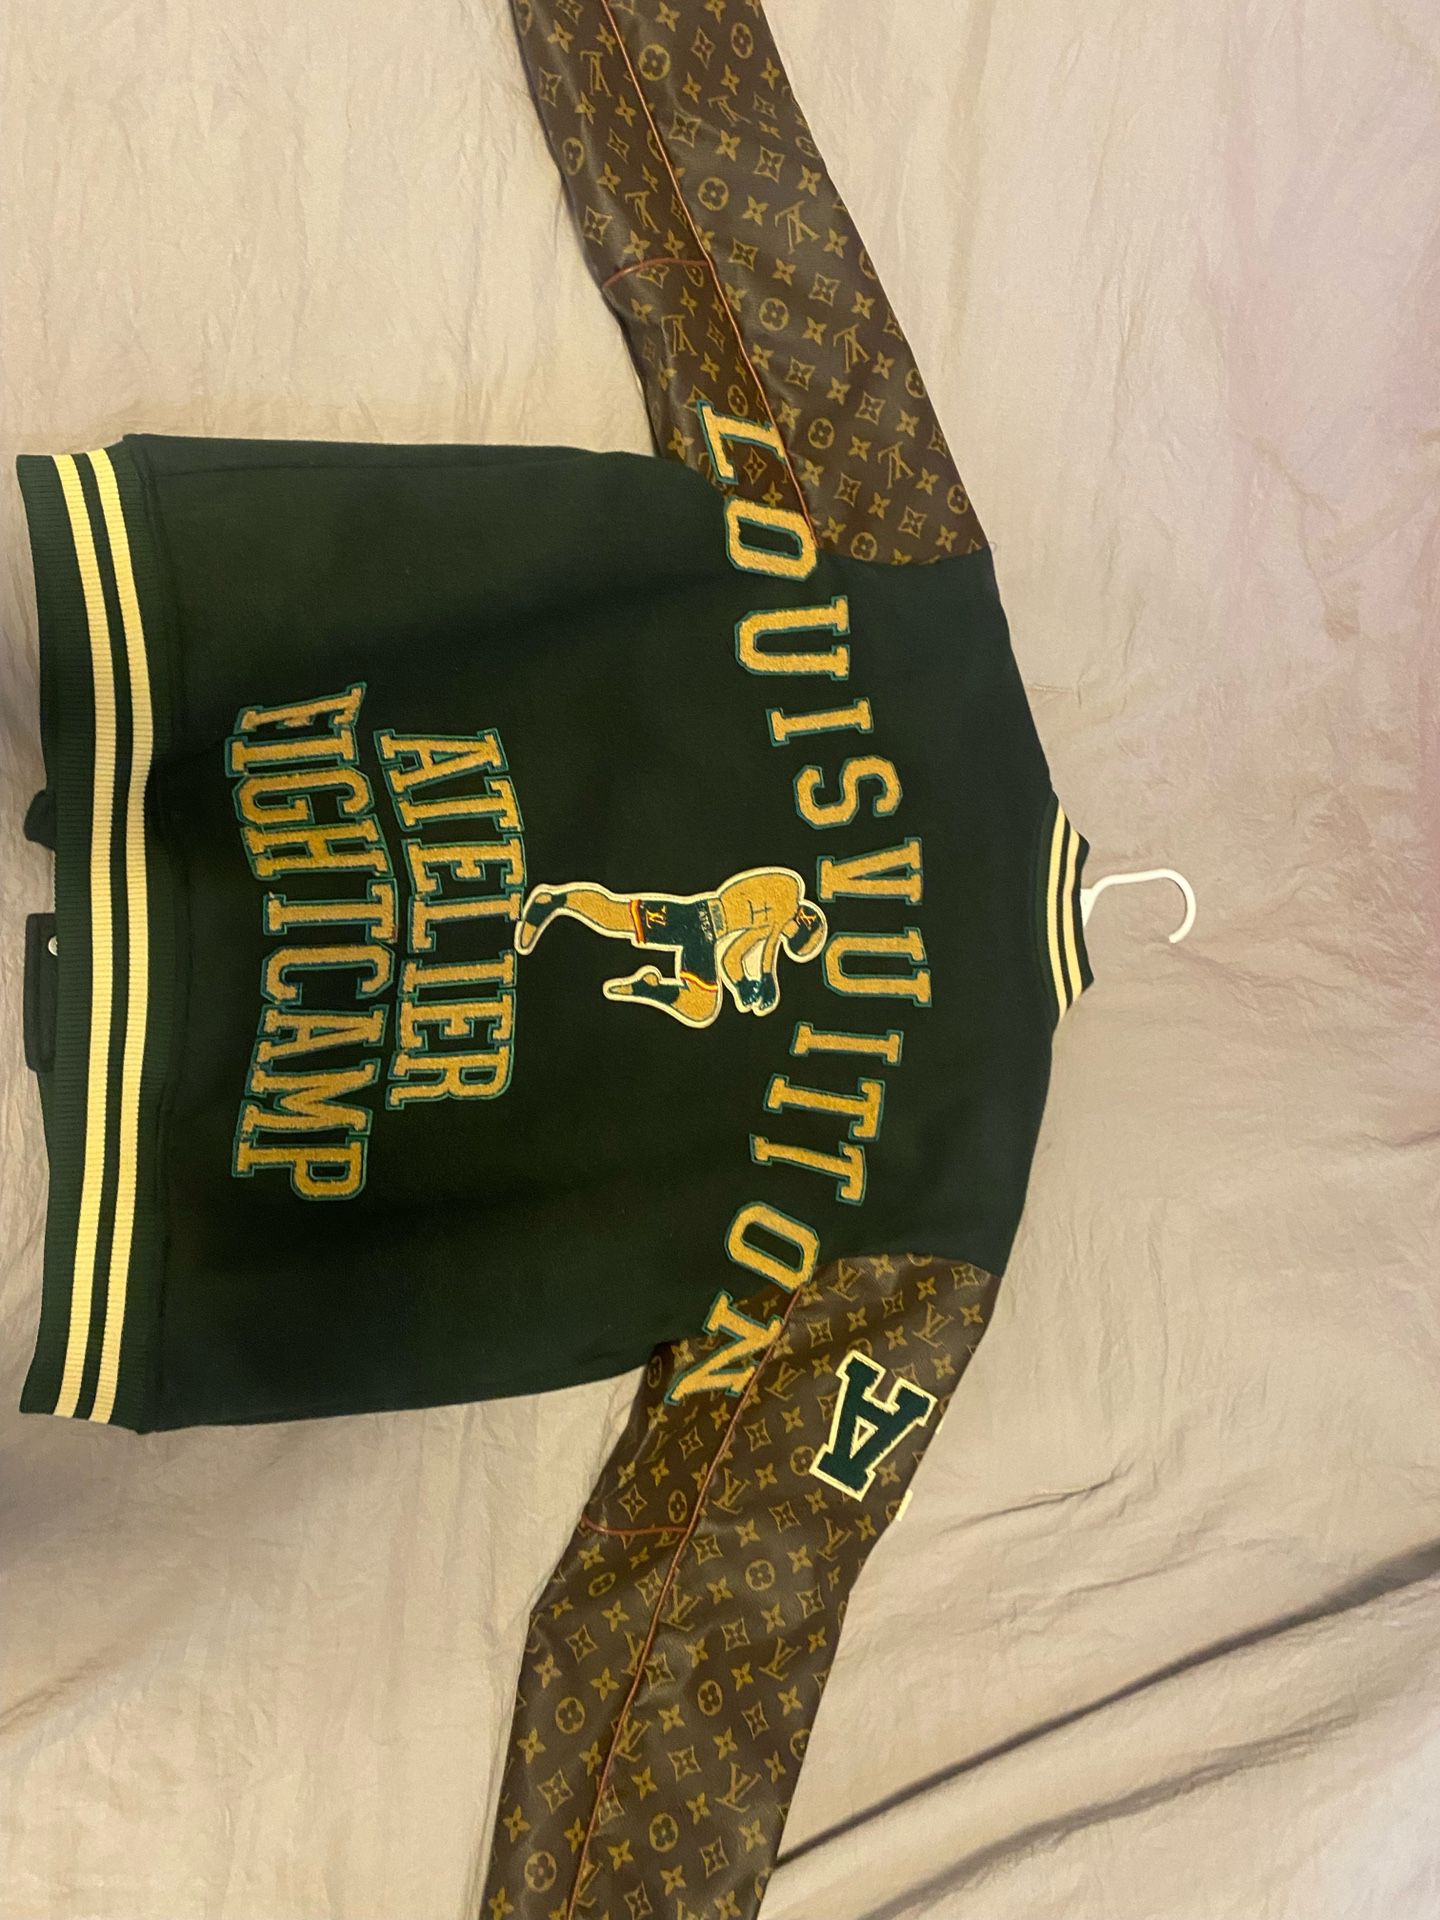 Green And Brown NightCamp LV Letterman for Sale in Darlington, SC - OfferUp